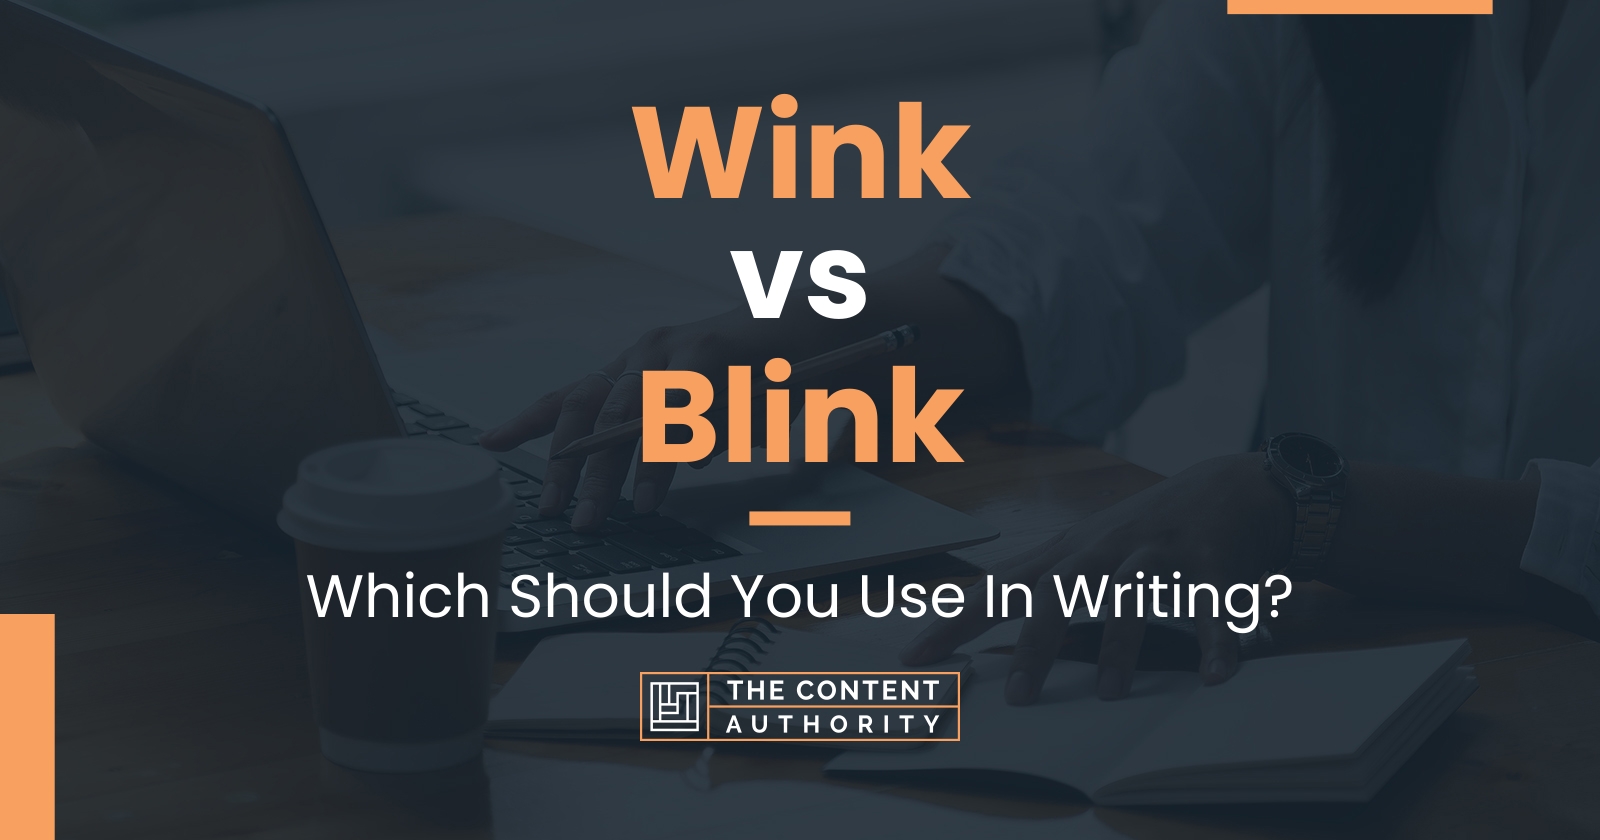 Wink vs Blink: Which Should You Use In Writing?